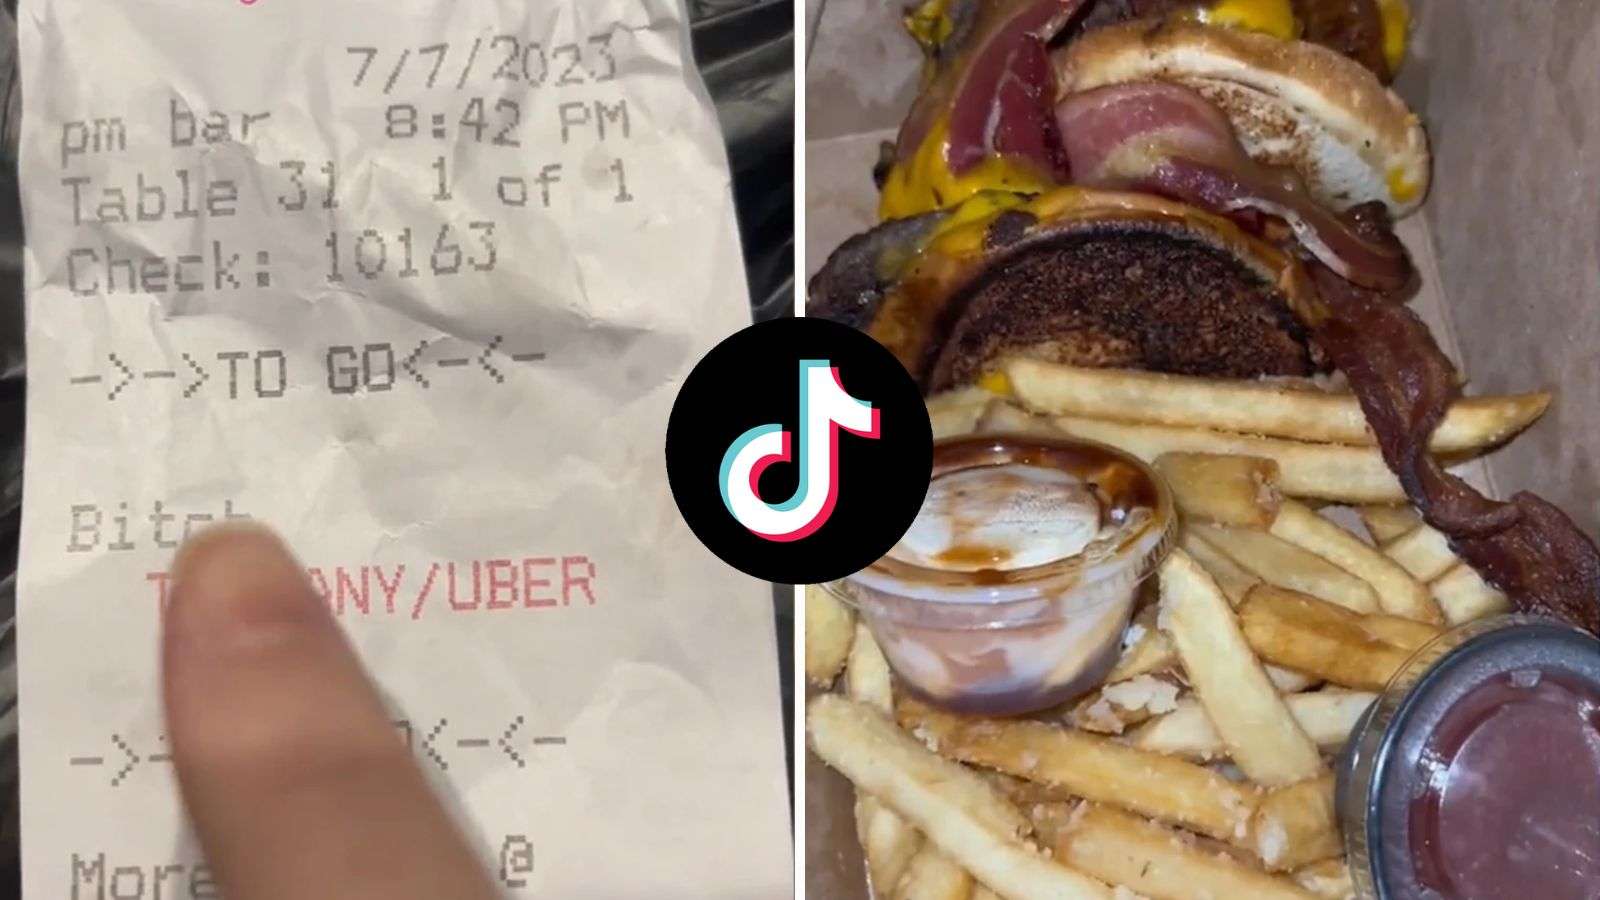 Photo 1 shows receipt, which says "B*tch." Photo 2 shows Uber Eats customer's food.